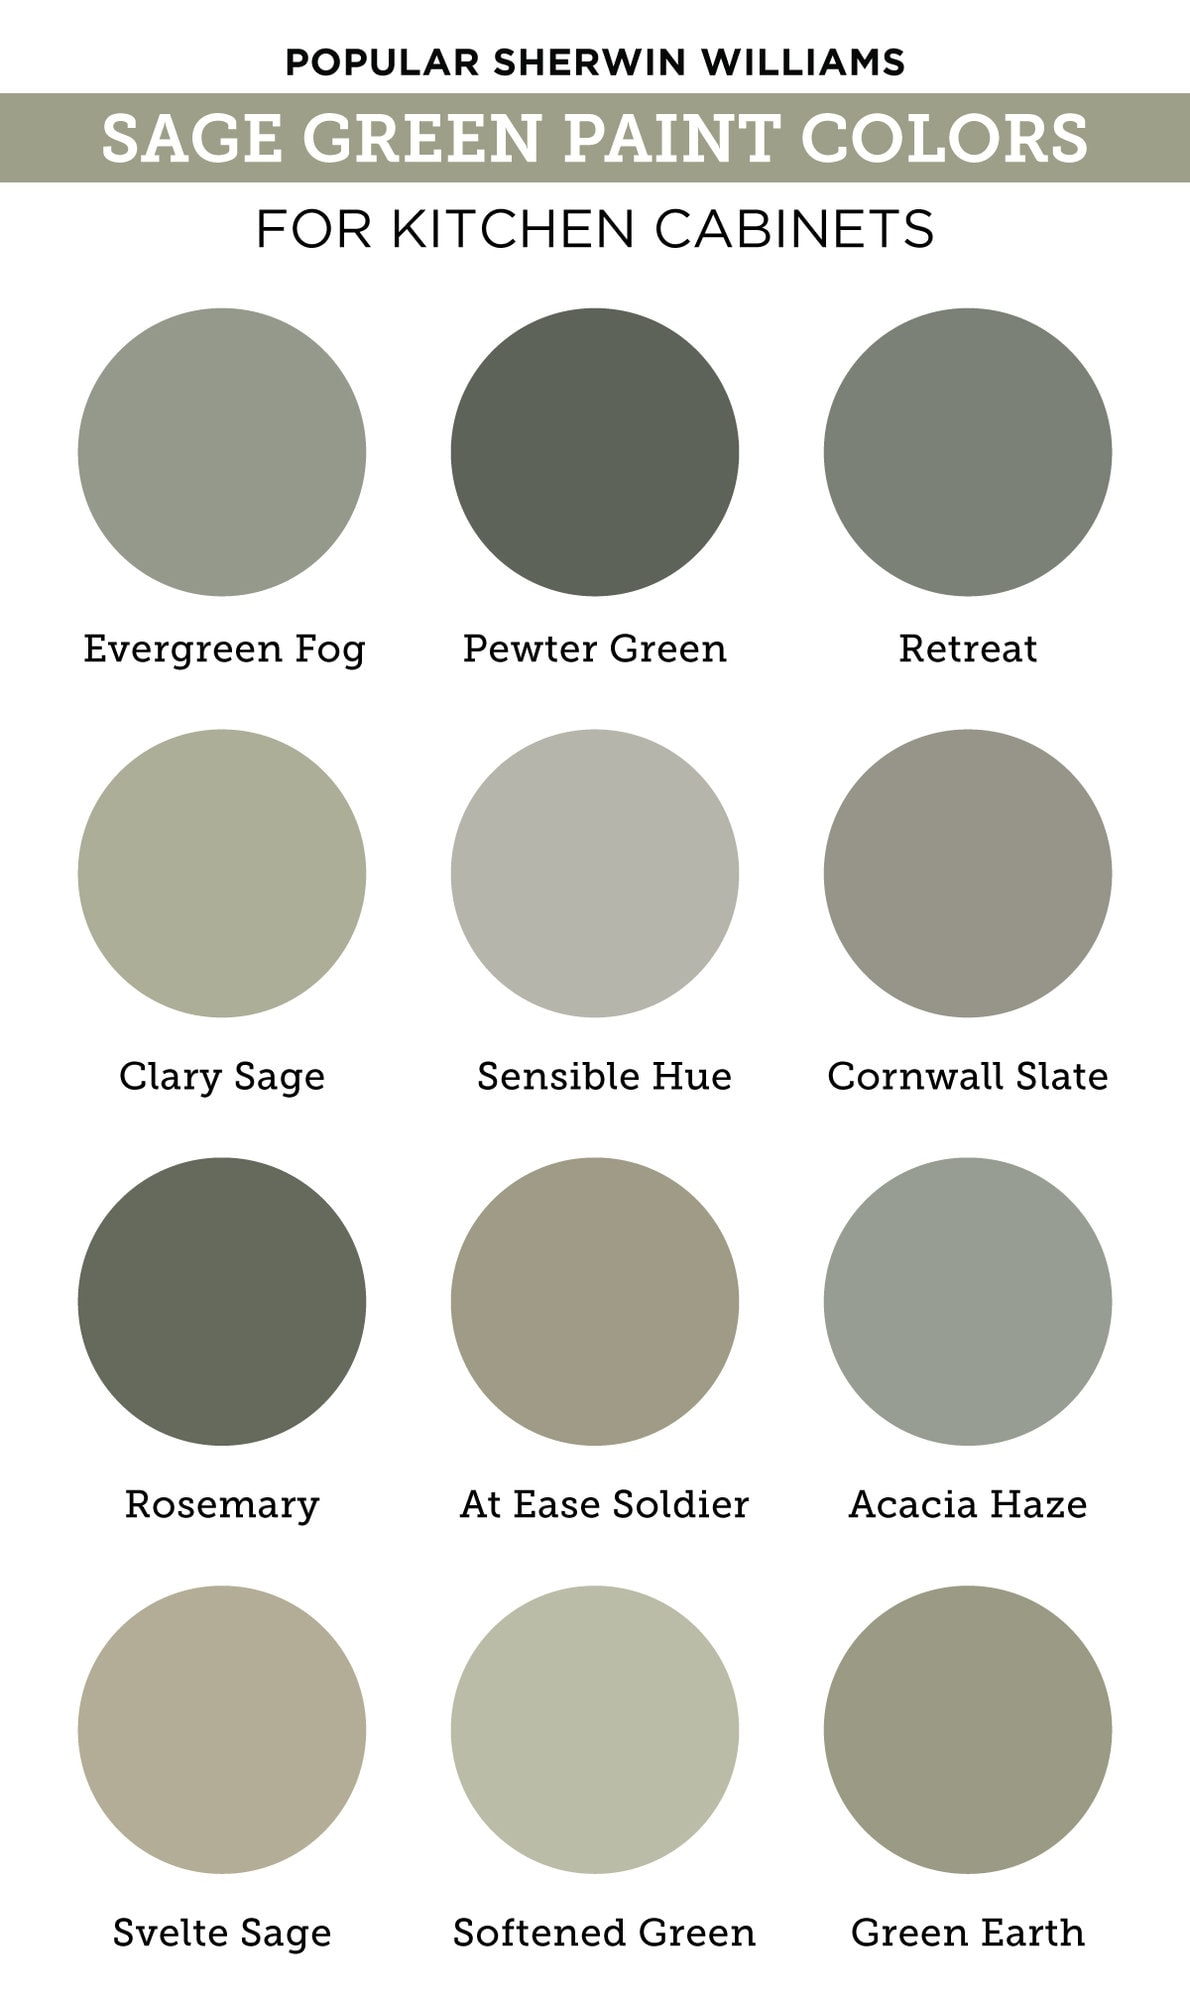 Sherwin Williams Rosemary - A Sophisticated Dark Green Paint Color